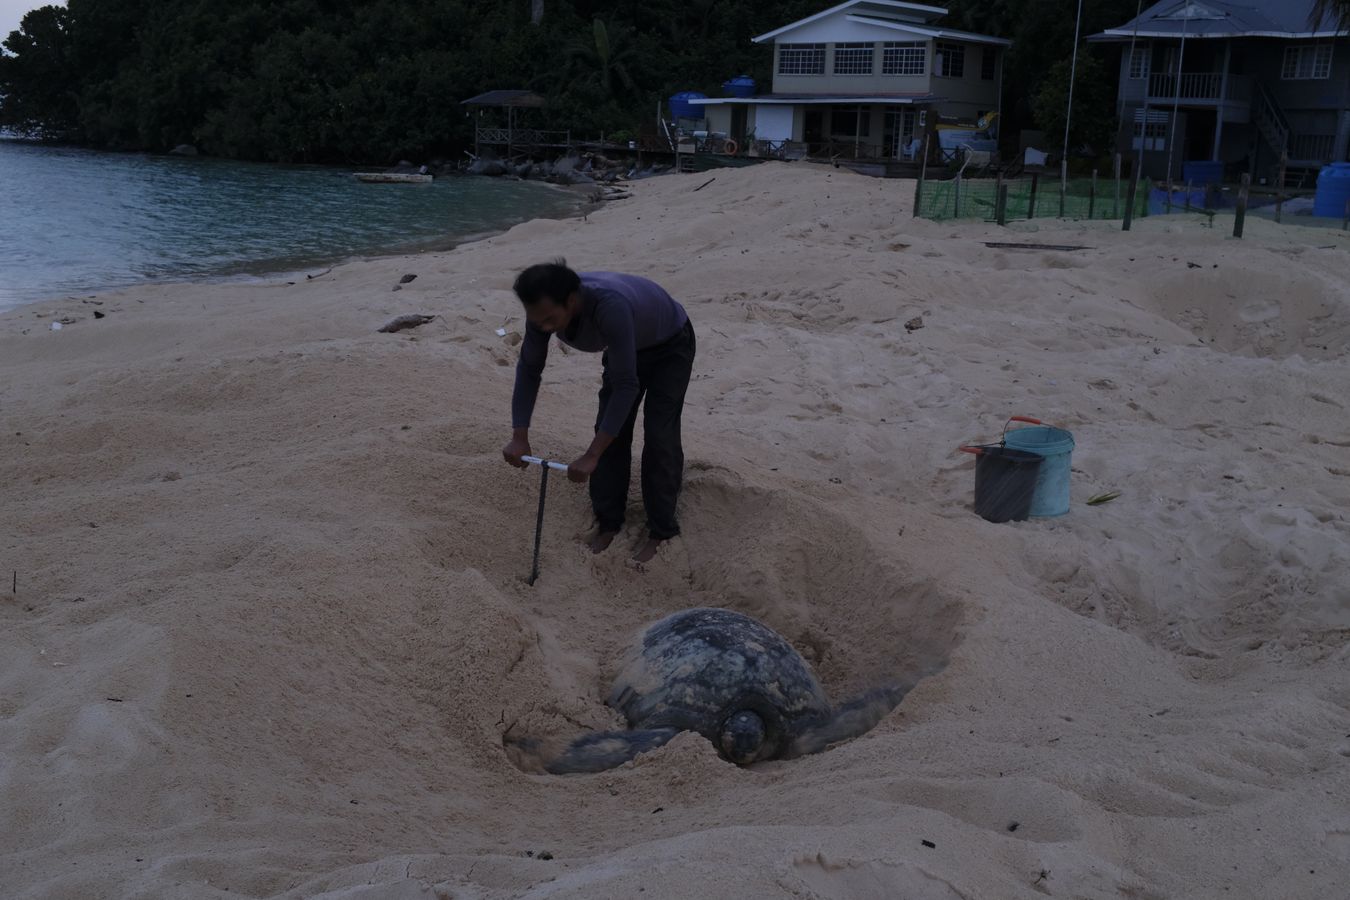 Ranger uses the tool to located the exact location of the eggs that the green turtle laid about 20 minutes earlier.